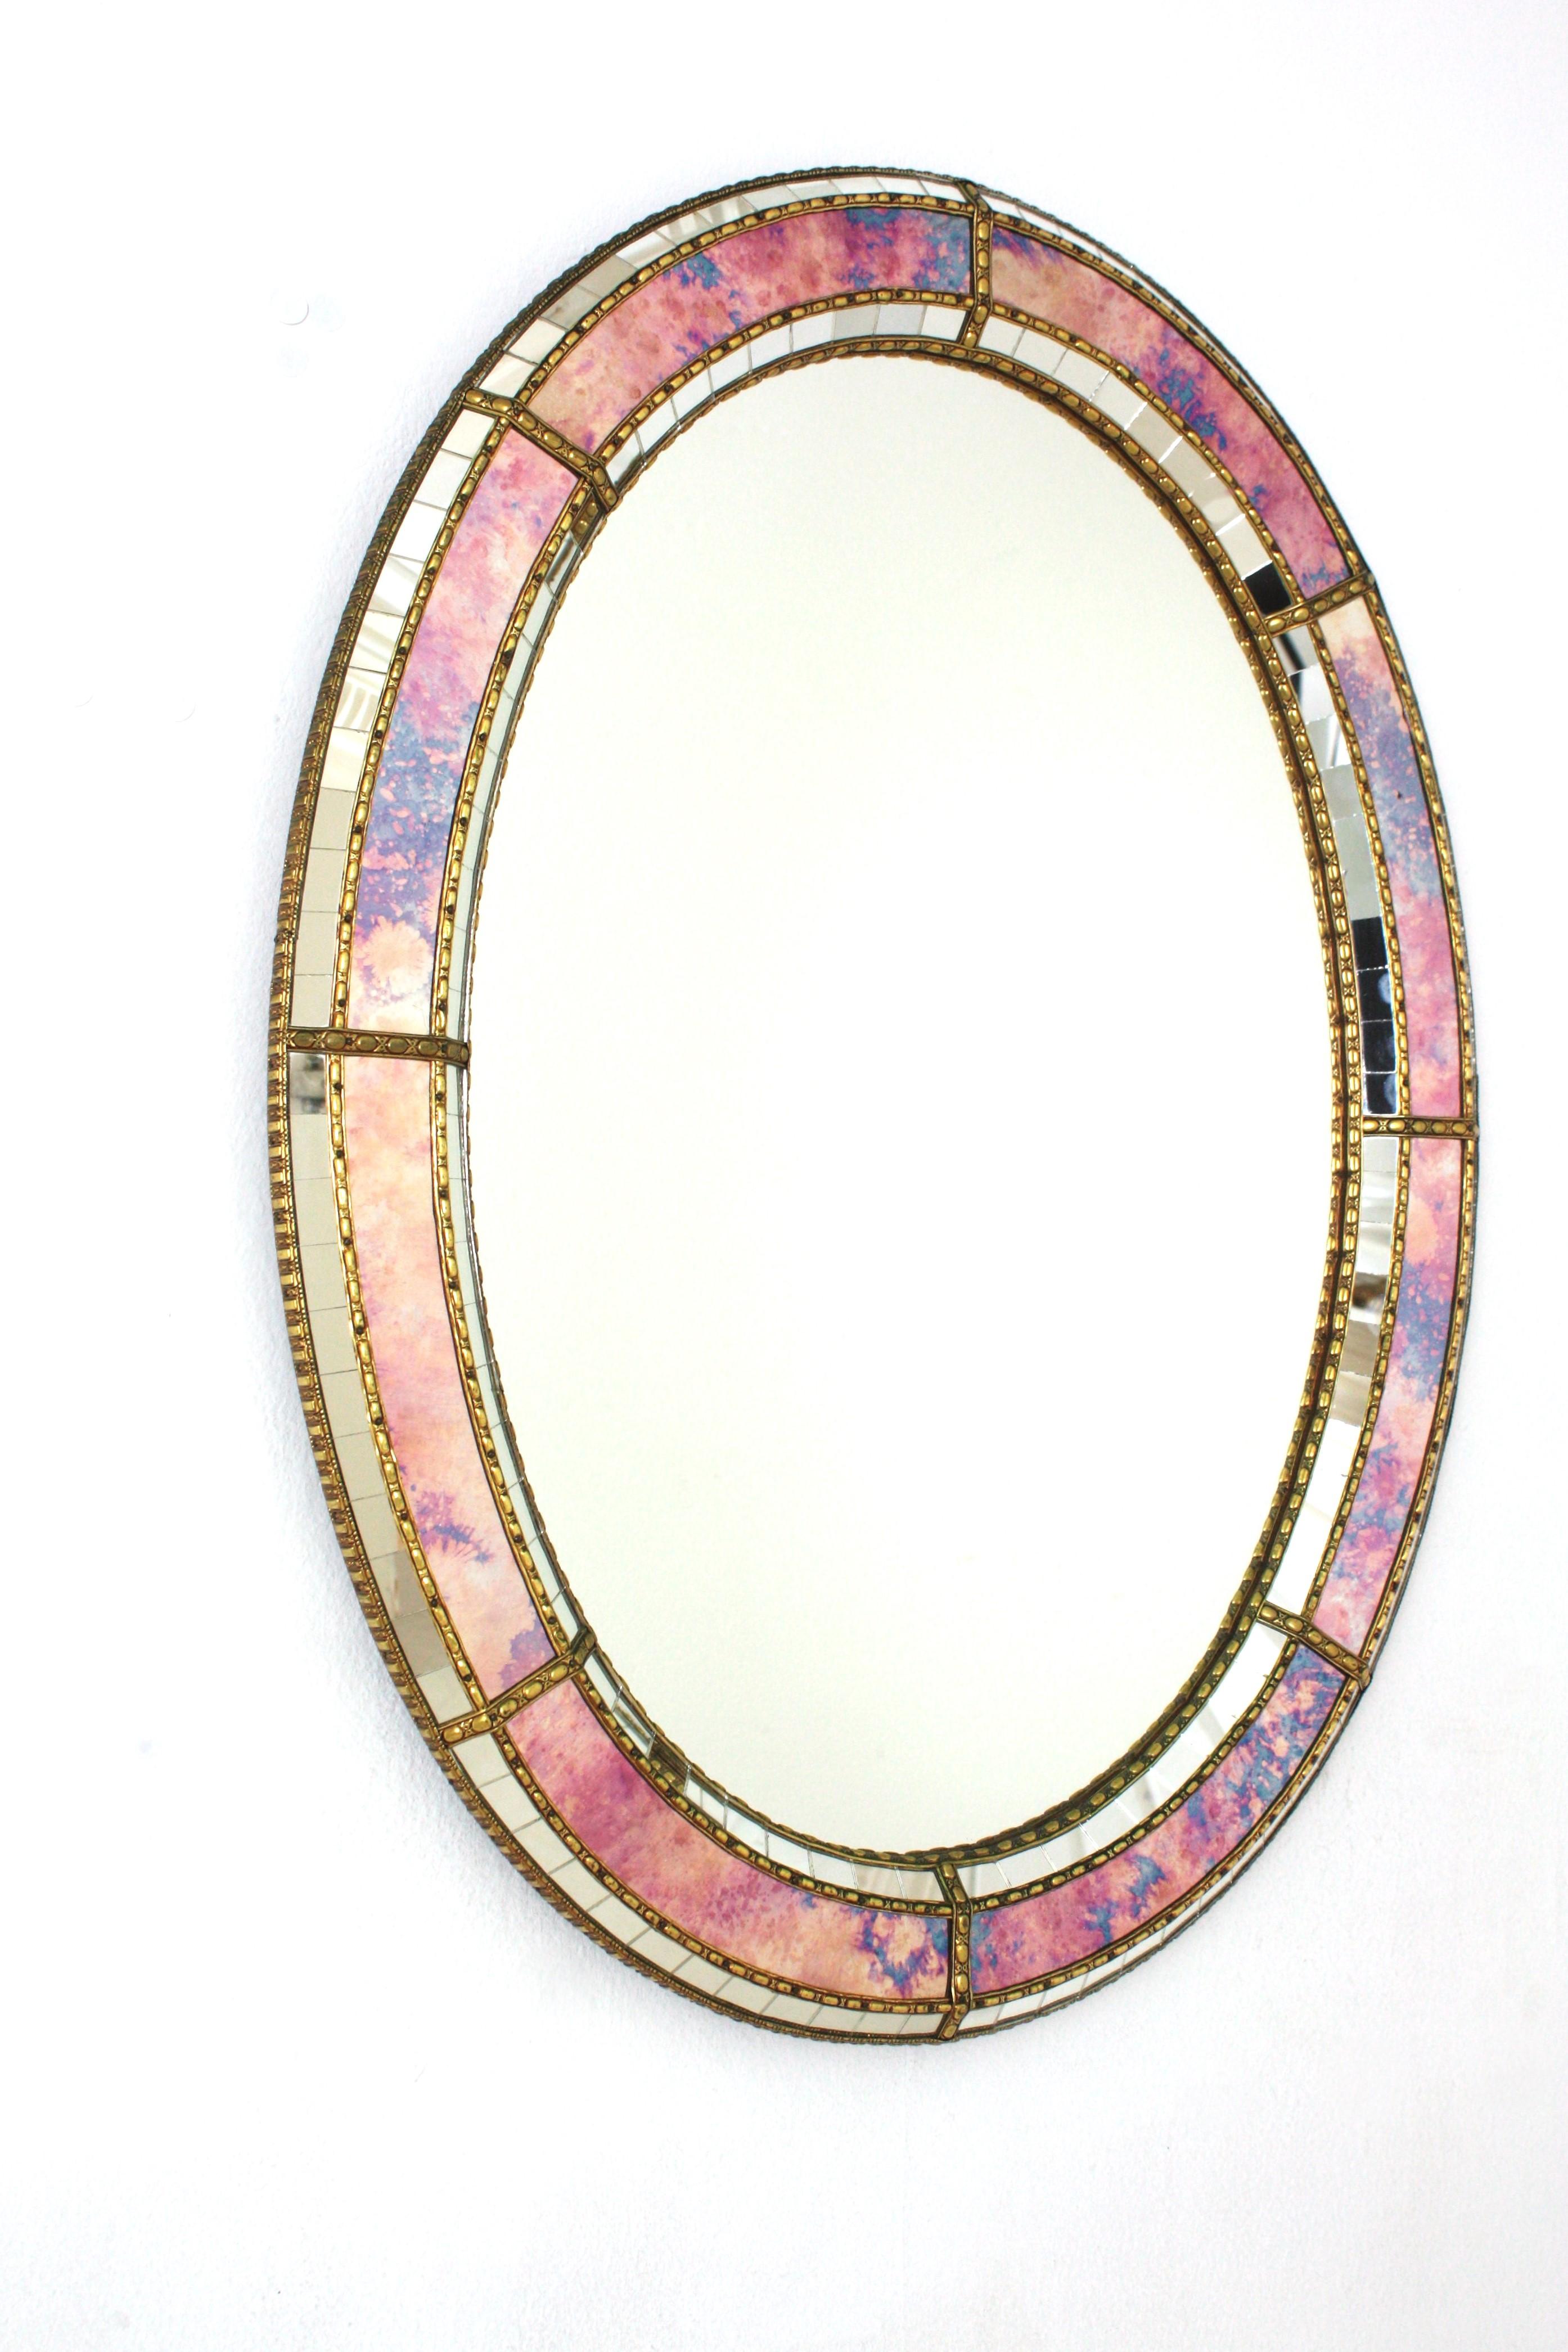 Hollywood Regency Oval Venetian Style Mirror with Pink Purple Glass and Brass Details